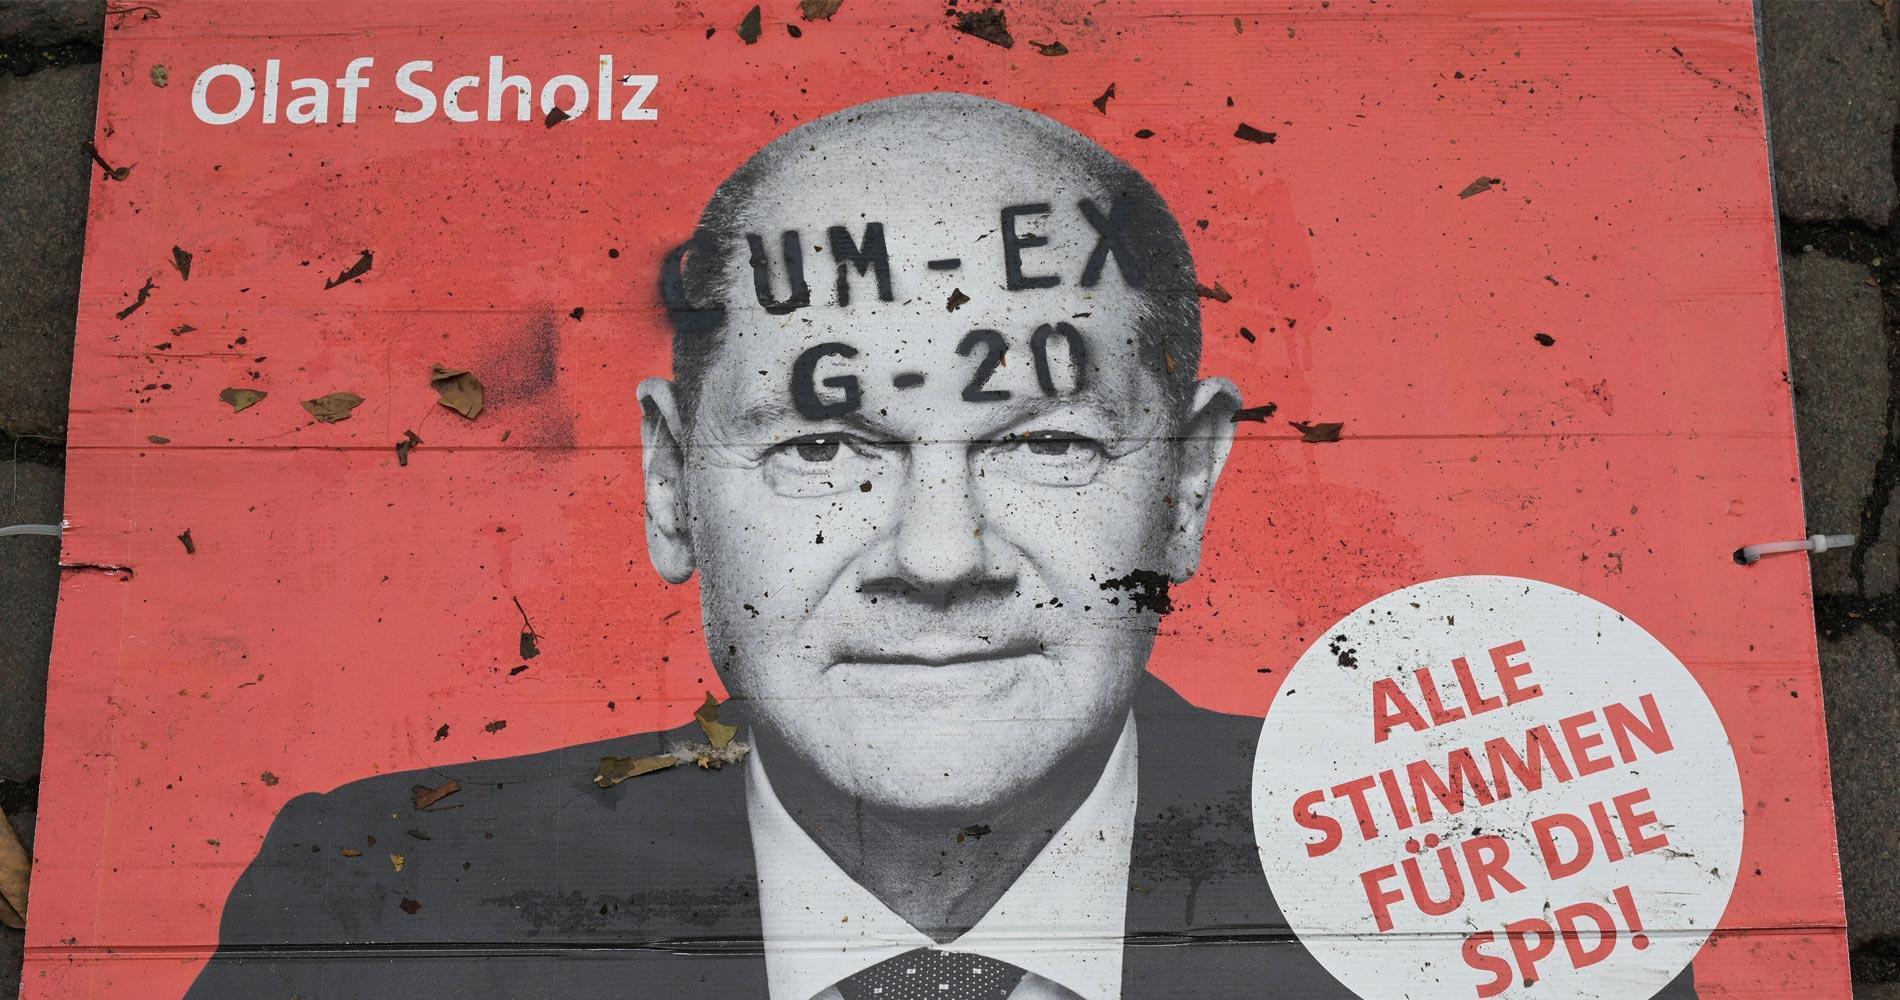 The Cum-Ex Scandal and Olaf Scholz’ Involvement